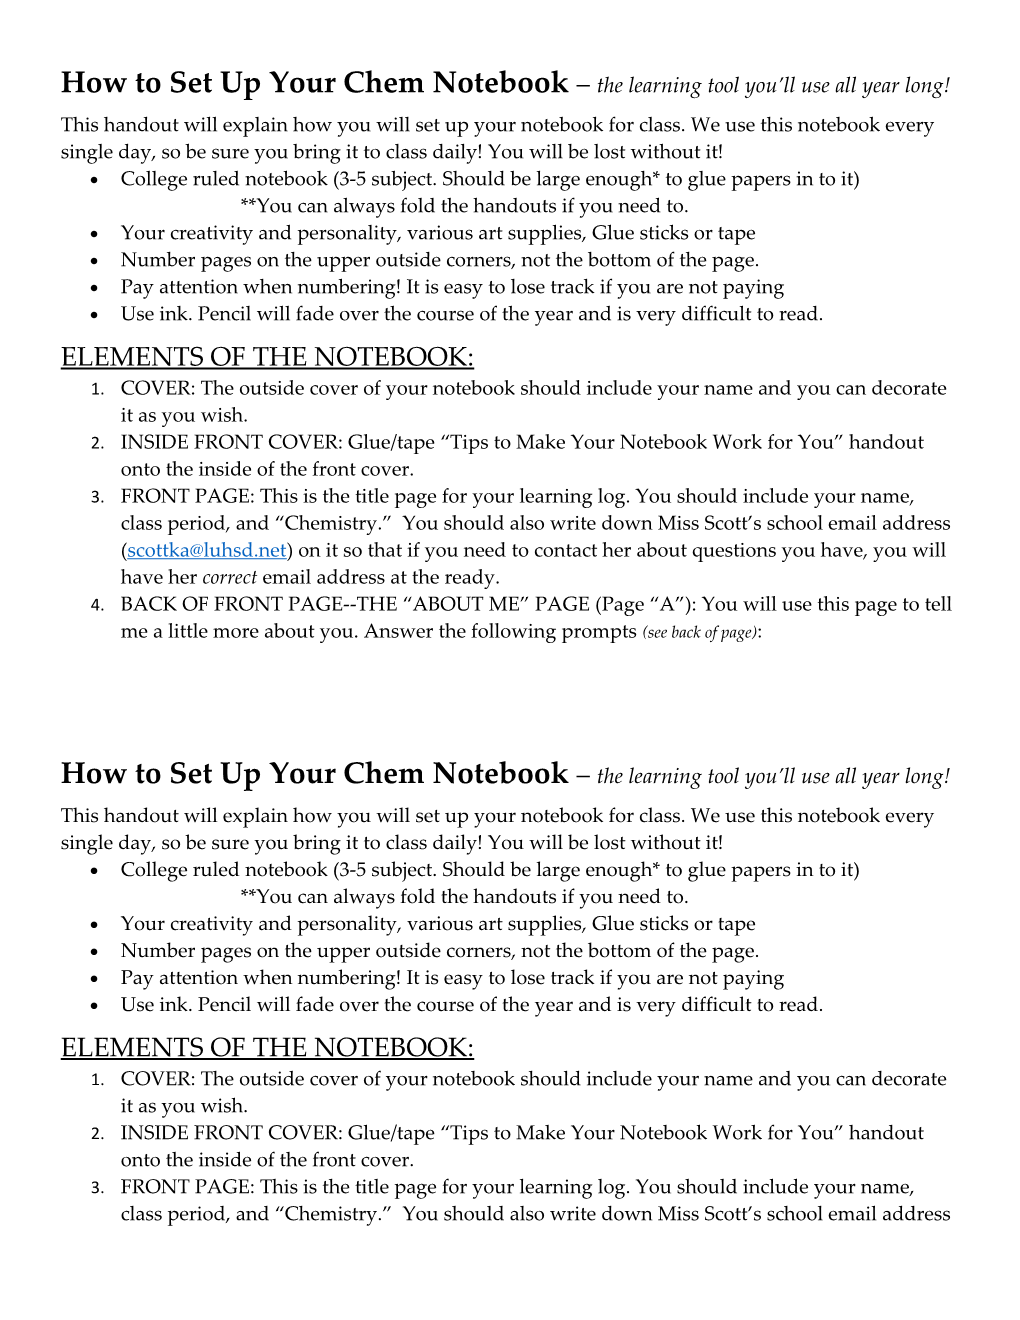 How to Set up Your Chem Notebook the Learning Tool You Ll Use All Year Long!